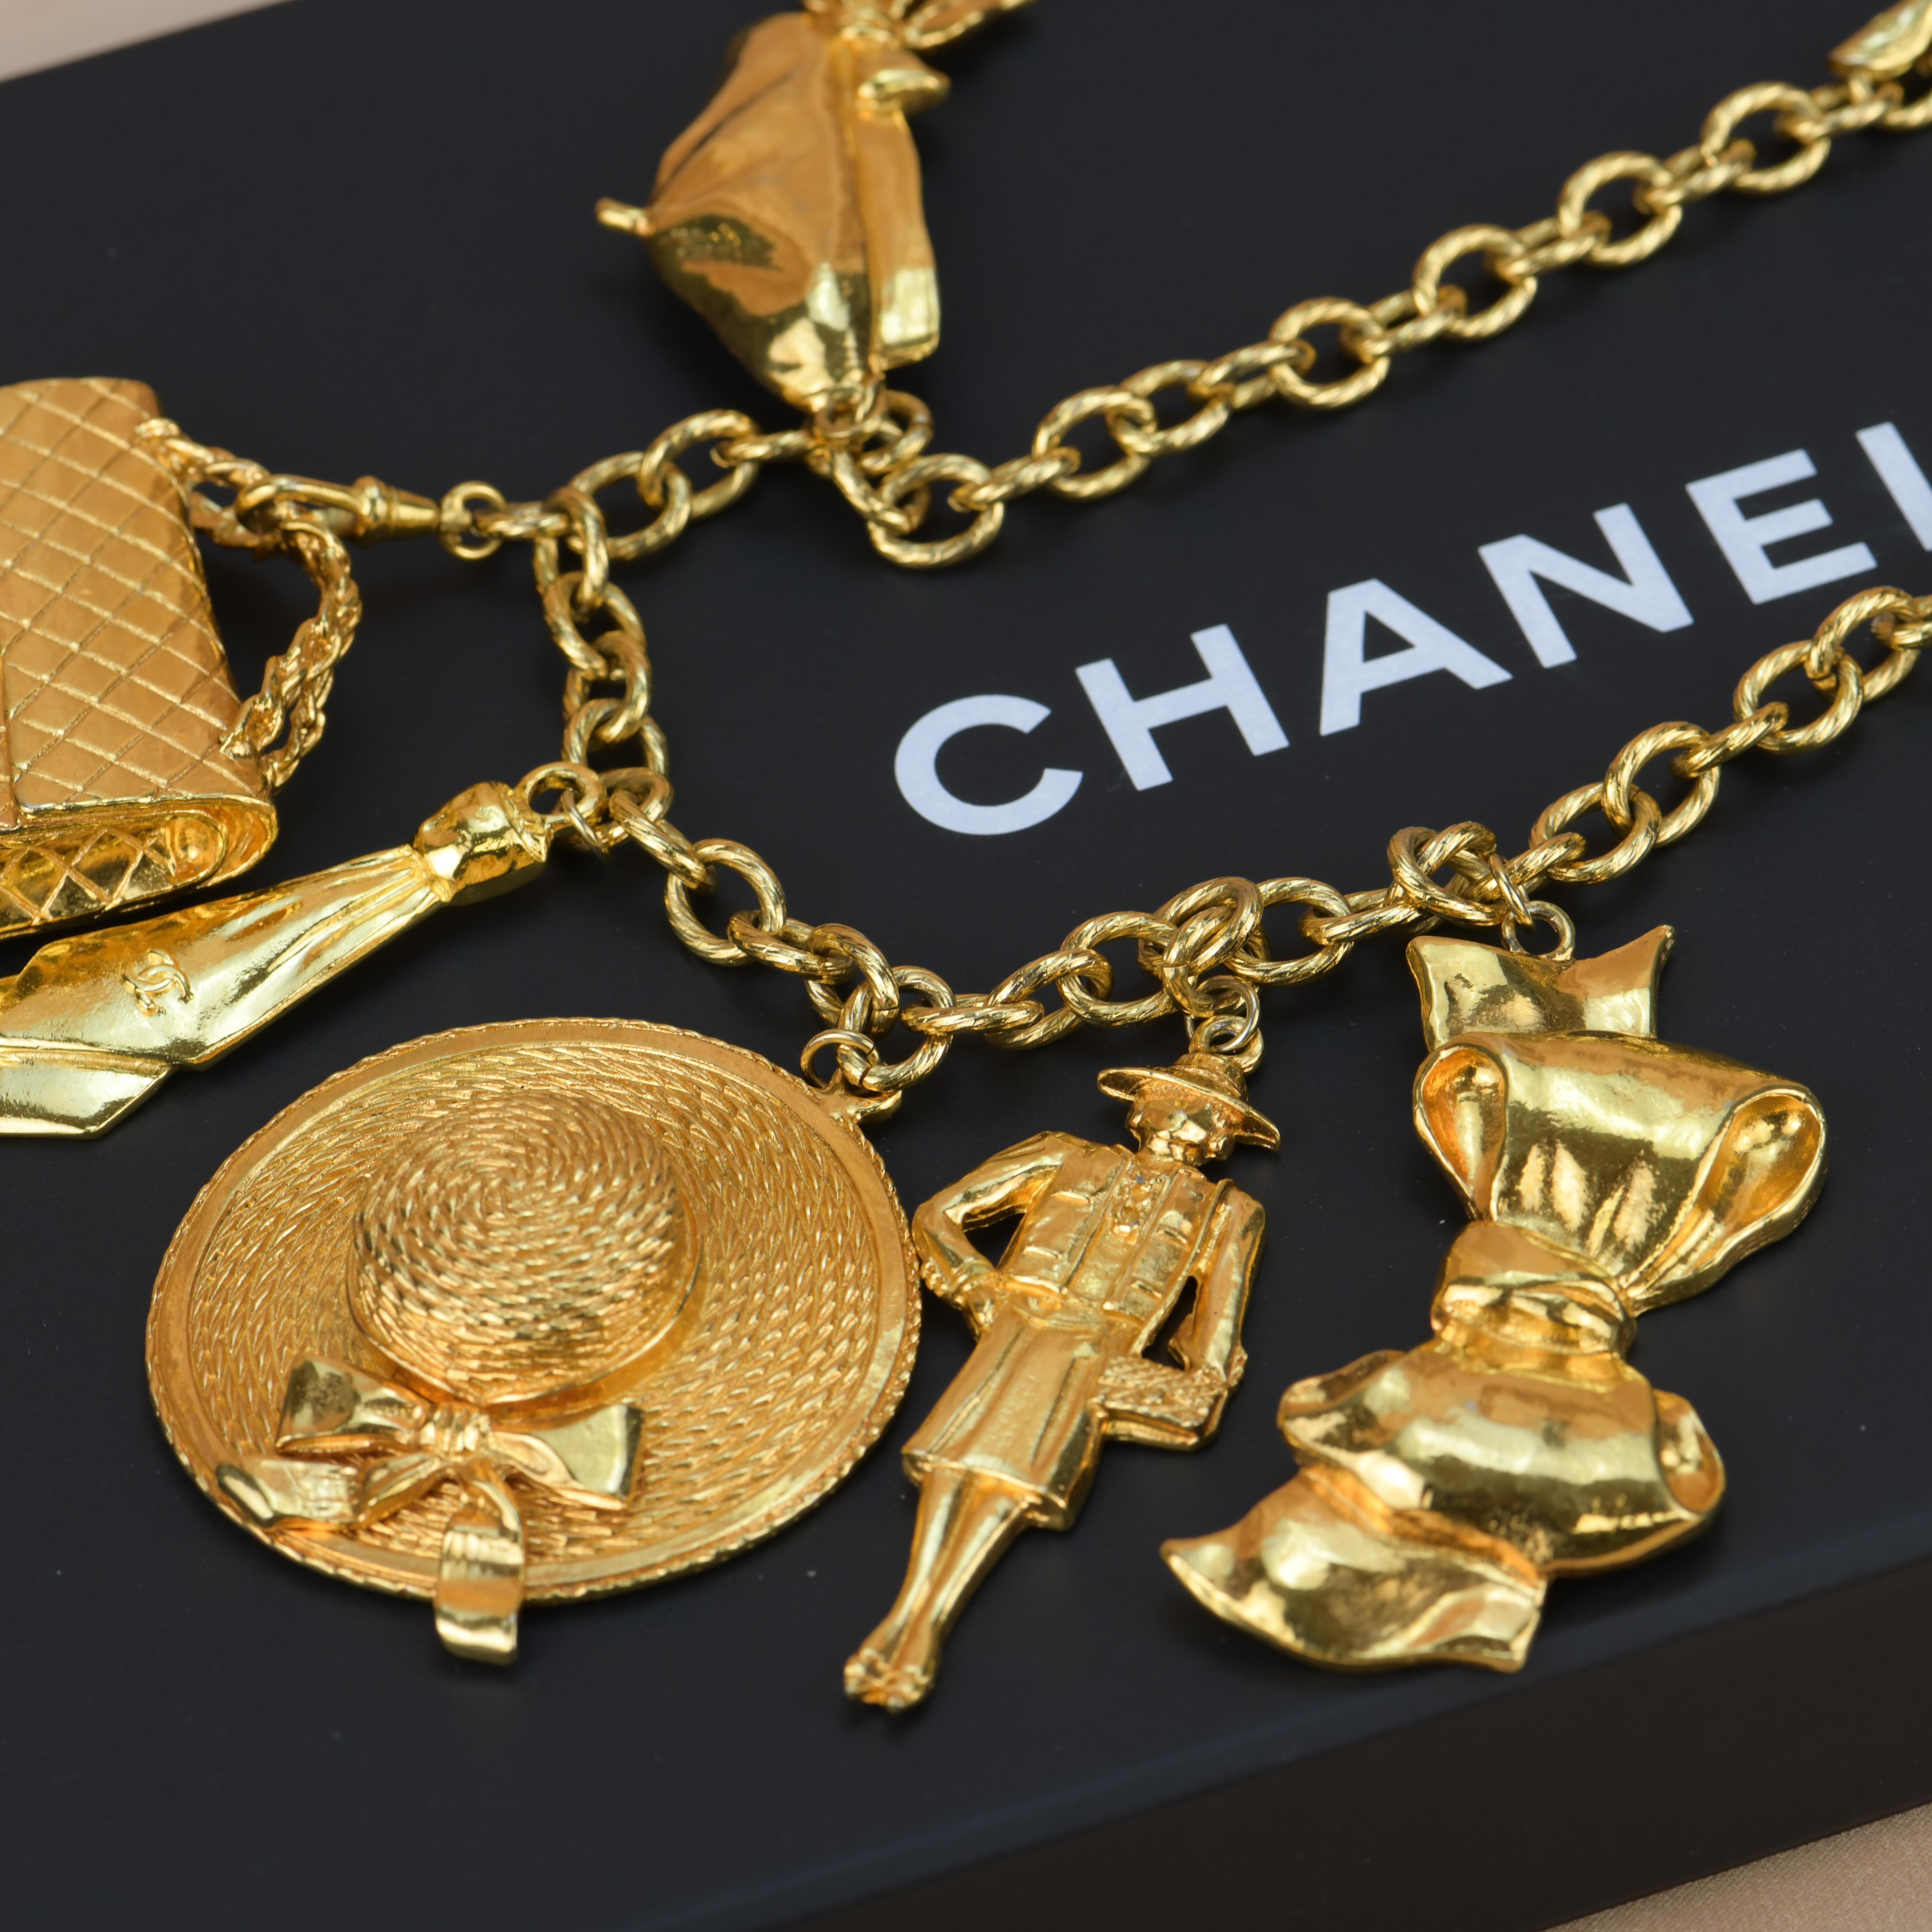 Brand: Chanel 
Period: Approx. 1990s
Model: Chain Necklace
__________________________________
Metal: Gold Plated
Closure: Lobster Clasp
Measurement: Approx. 45cm L 
__________________________________
Condition Excellent 
Comes with Chanel Box